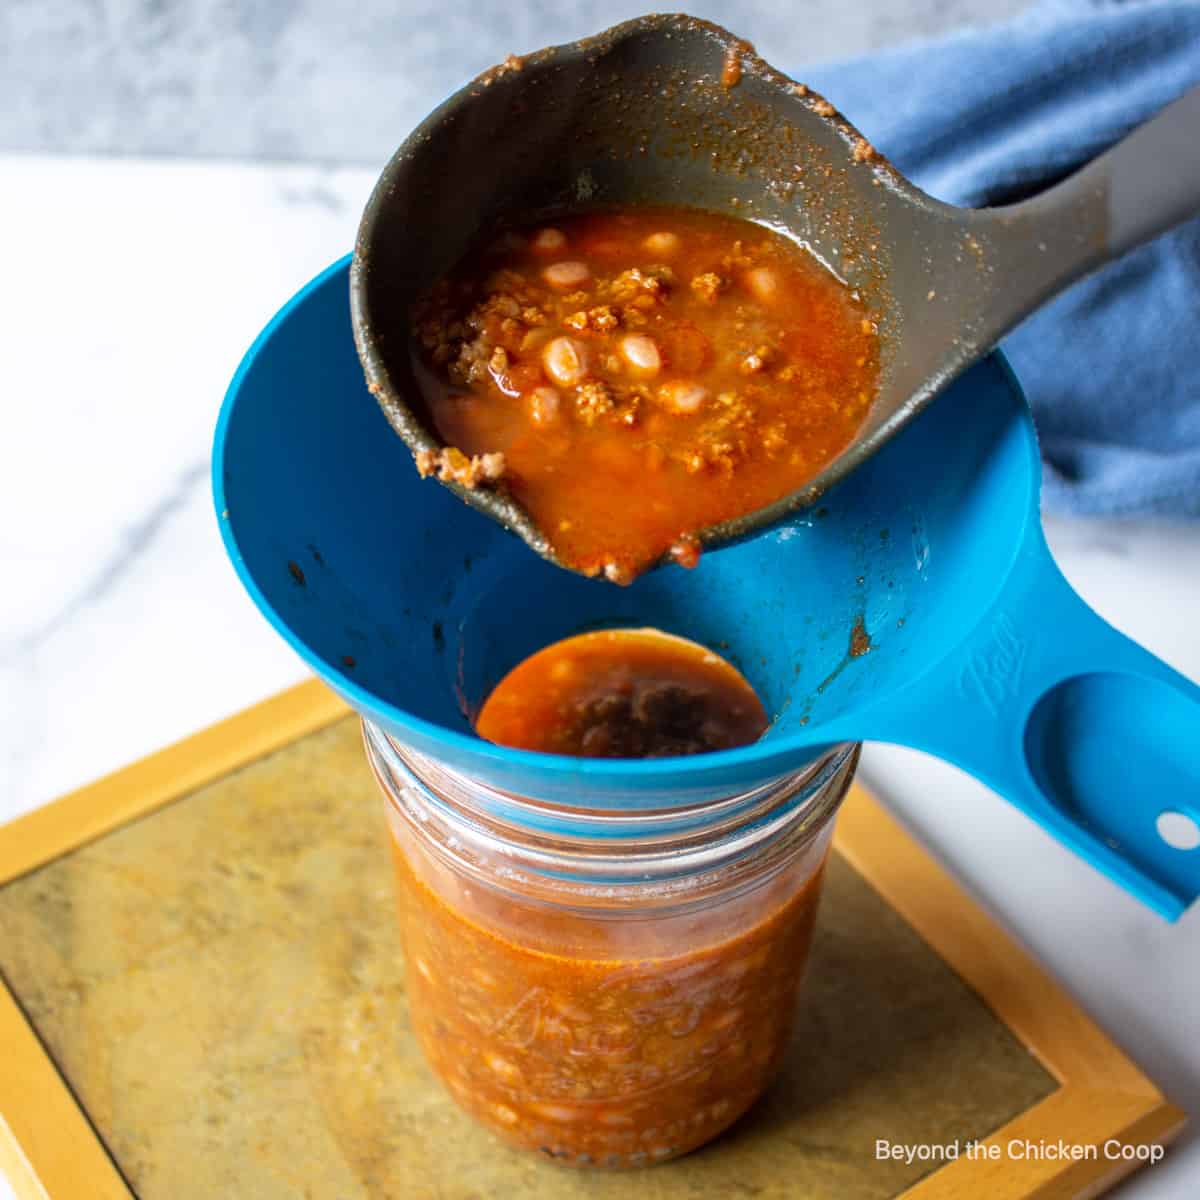 Ladeling chili into canning jars.